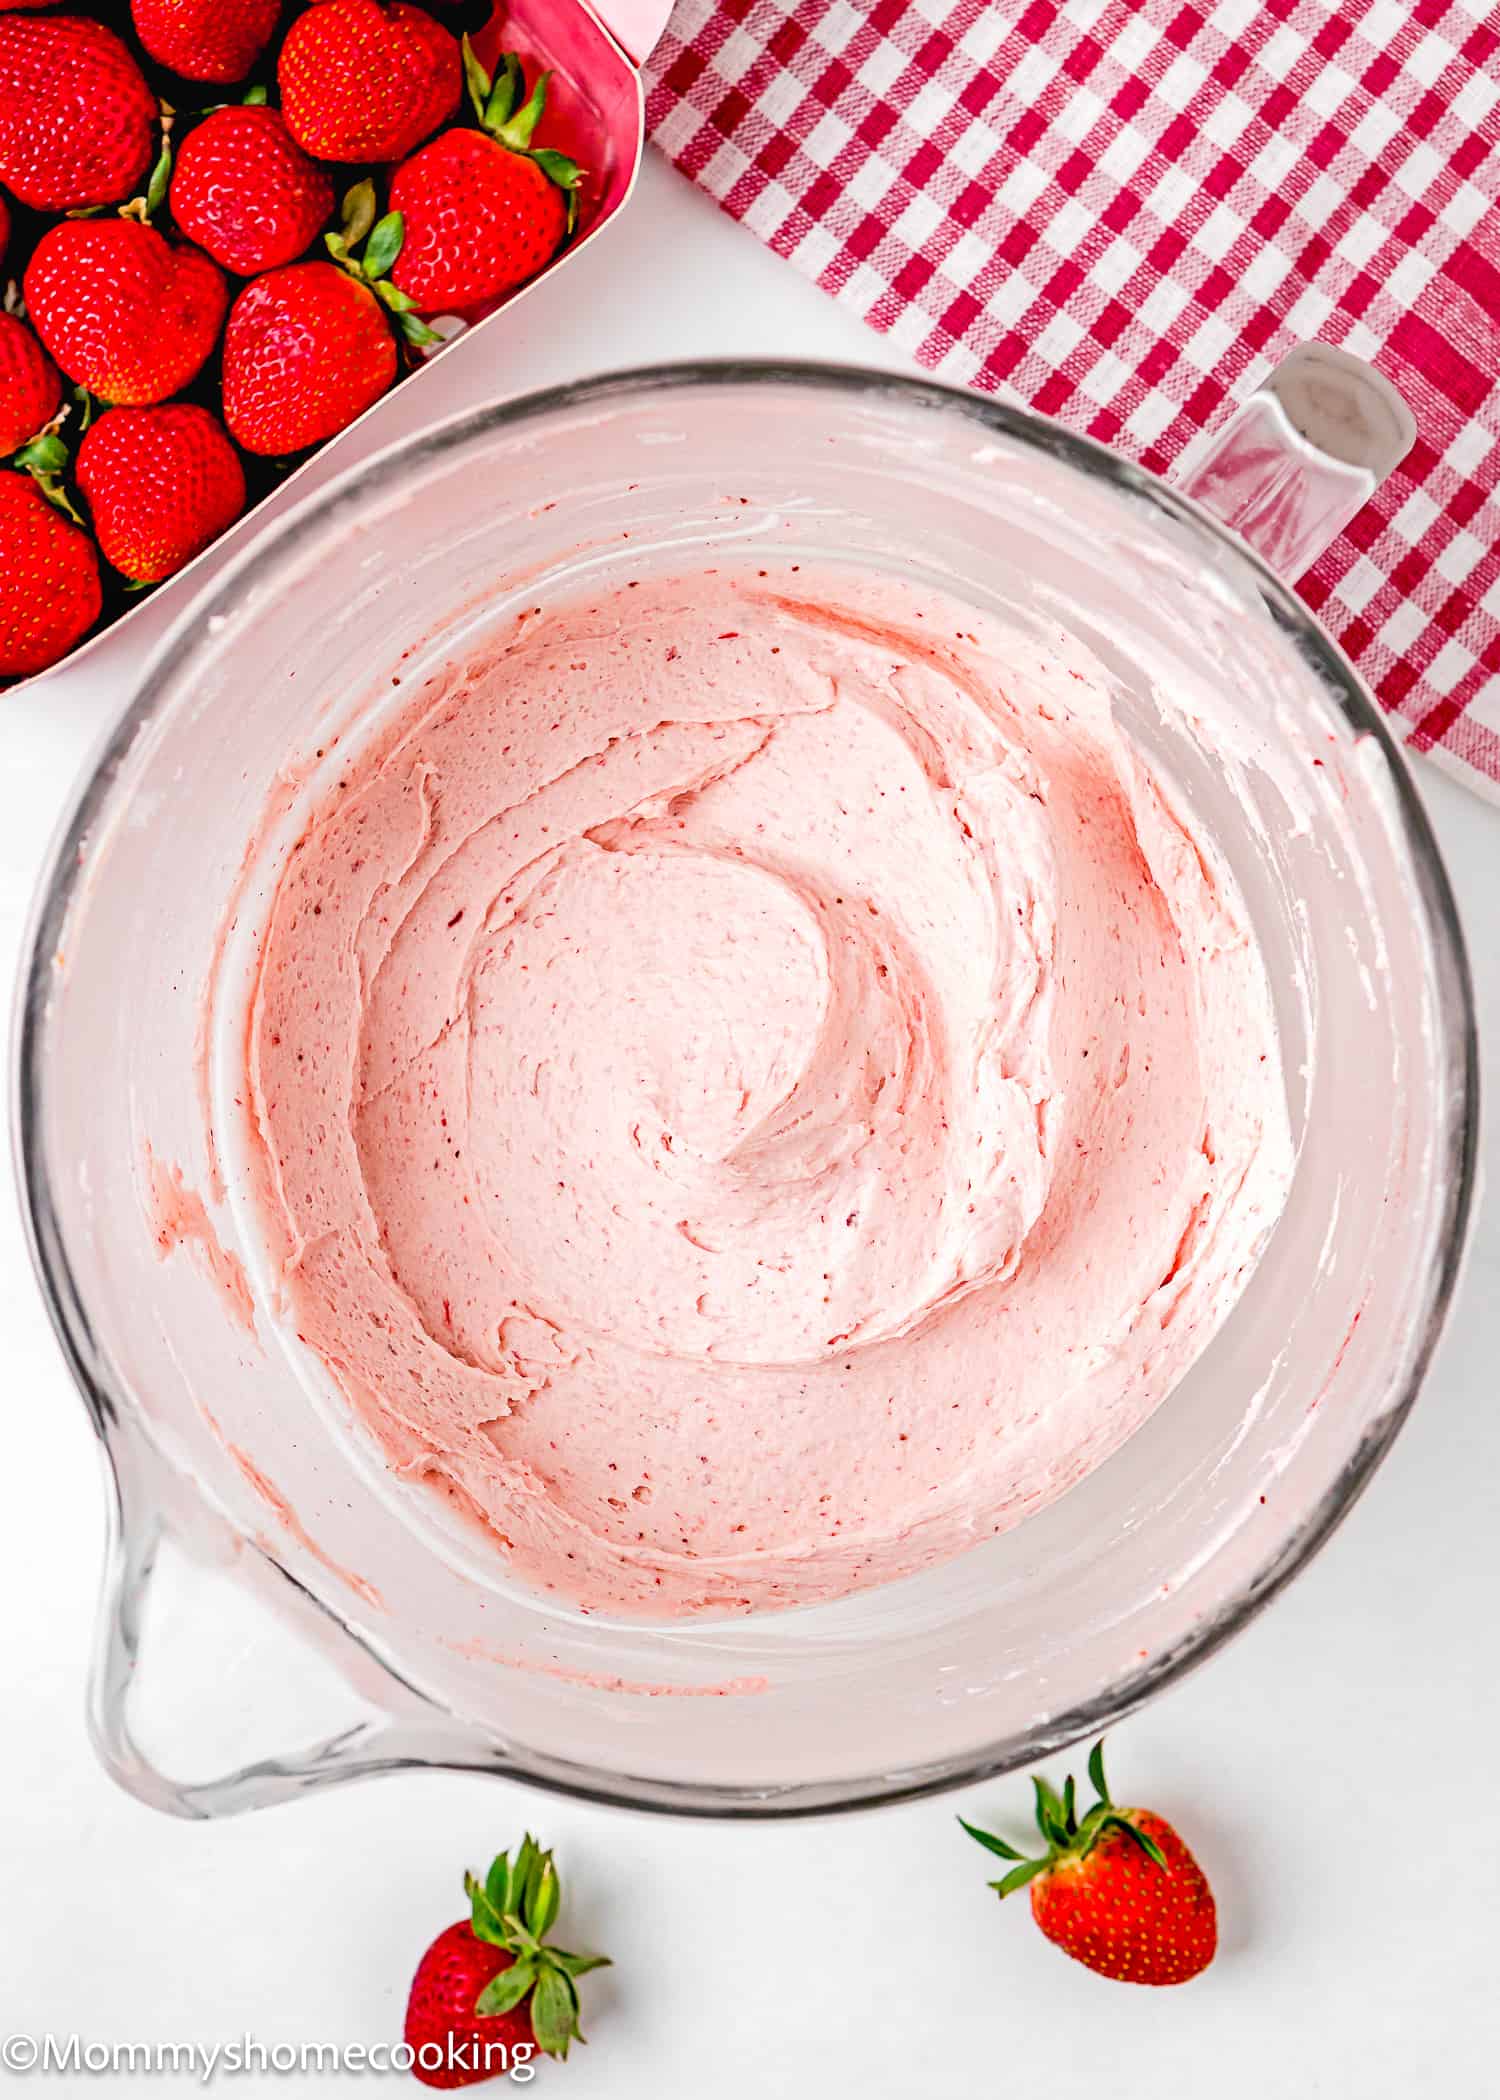 easy homemade strawberry frosting in a stand mixer bowl over a white surface with fresh strawberries in the side and a red kitchen towel.